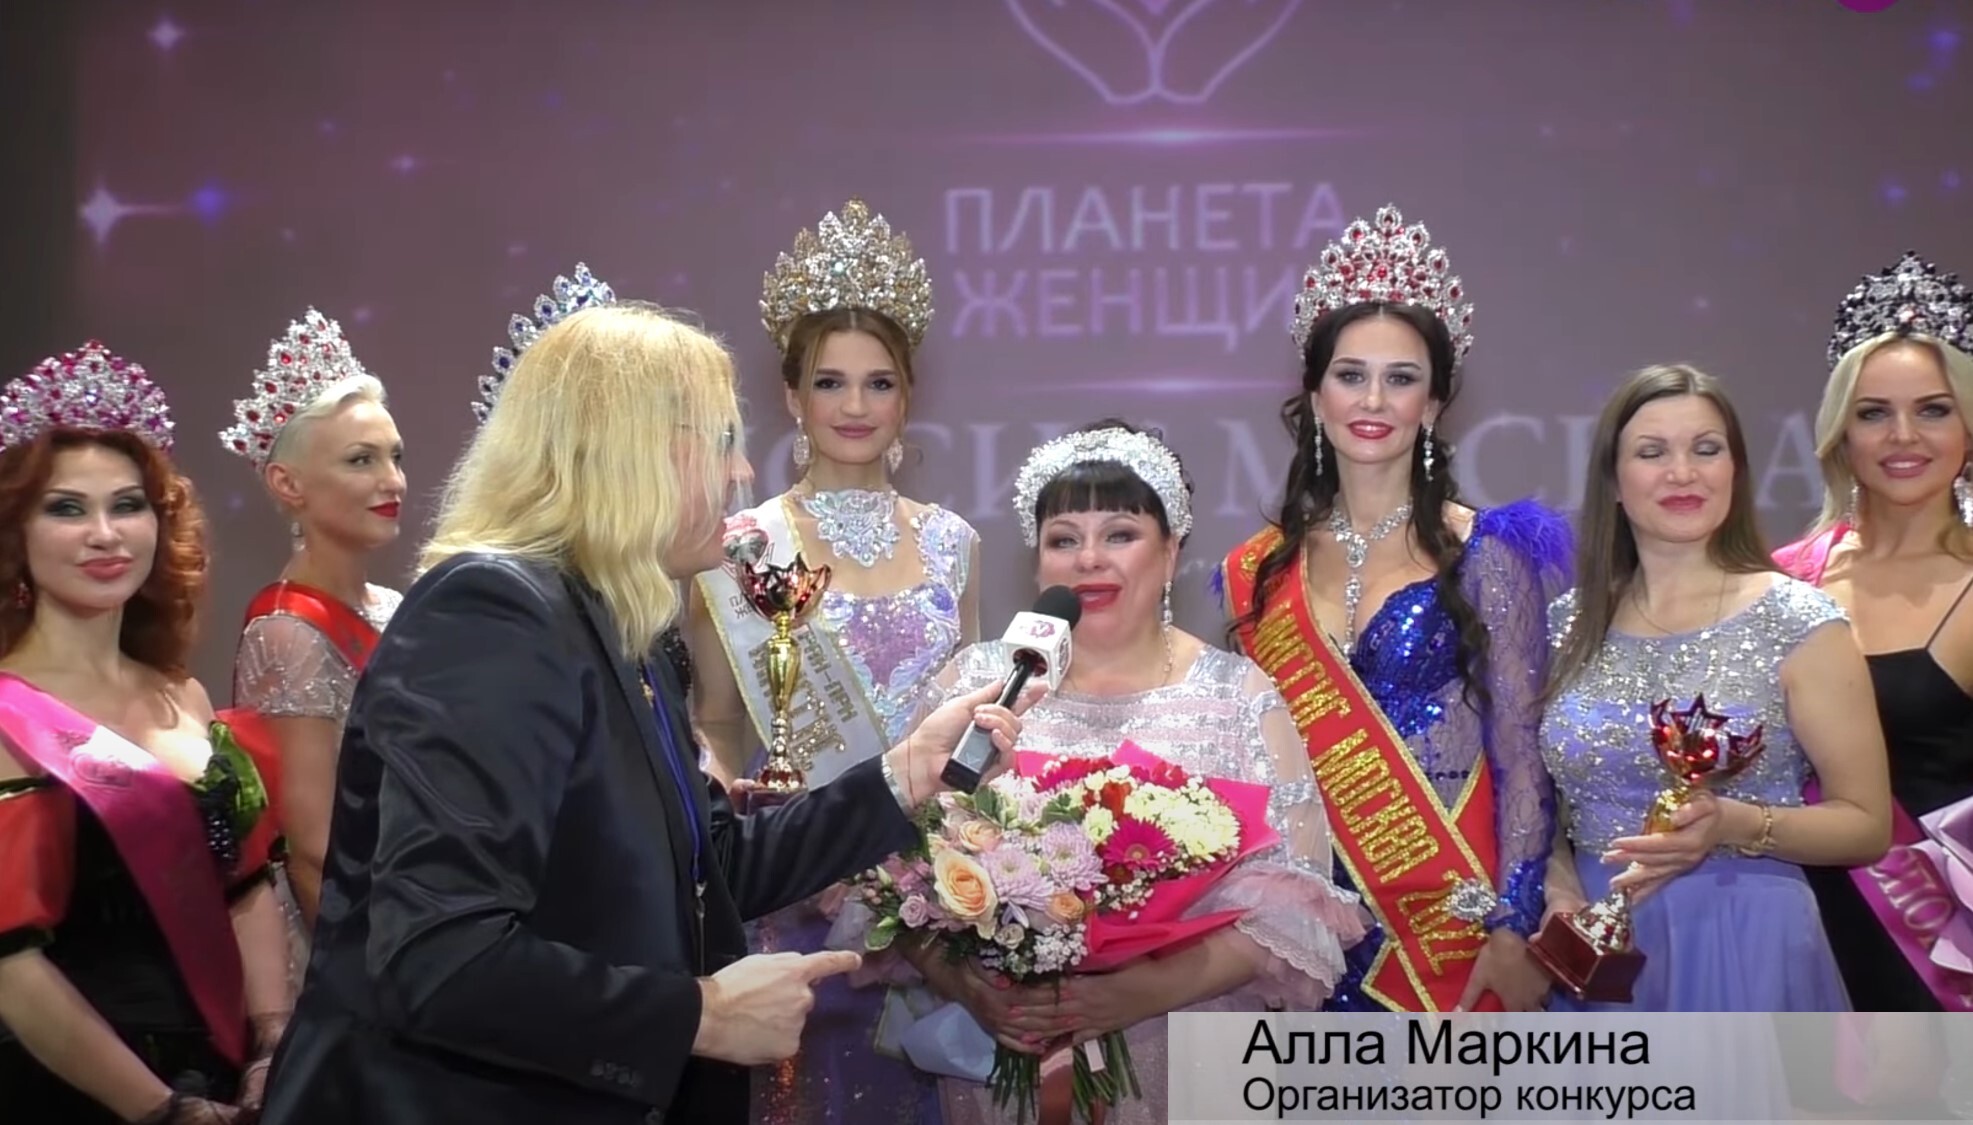 Bannaya Nina is the new queen of the capital - Beauty Queen, Capital, Moscow, Russia, Longpost, news